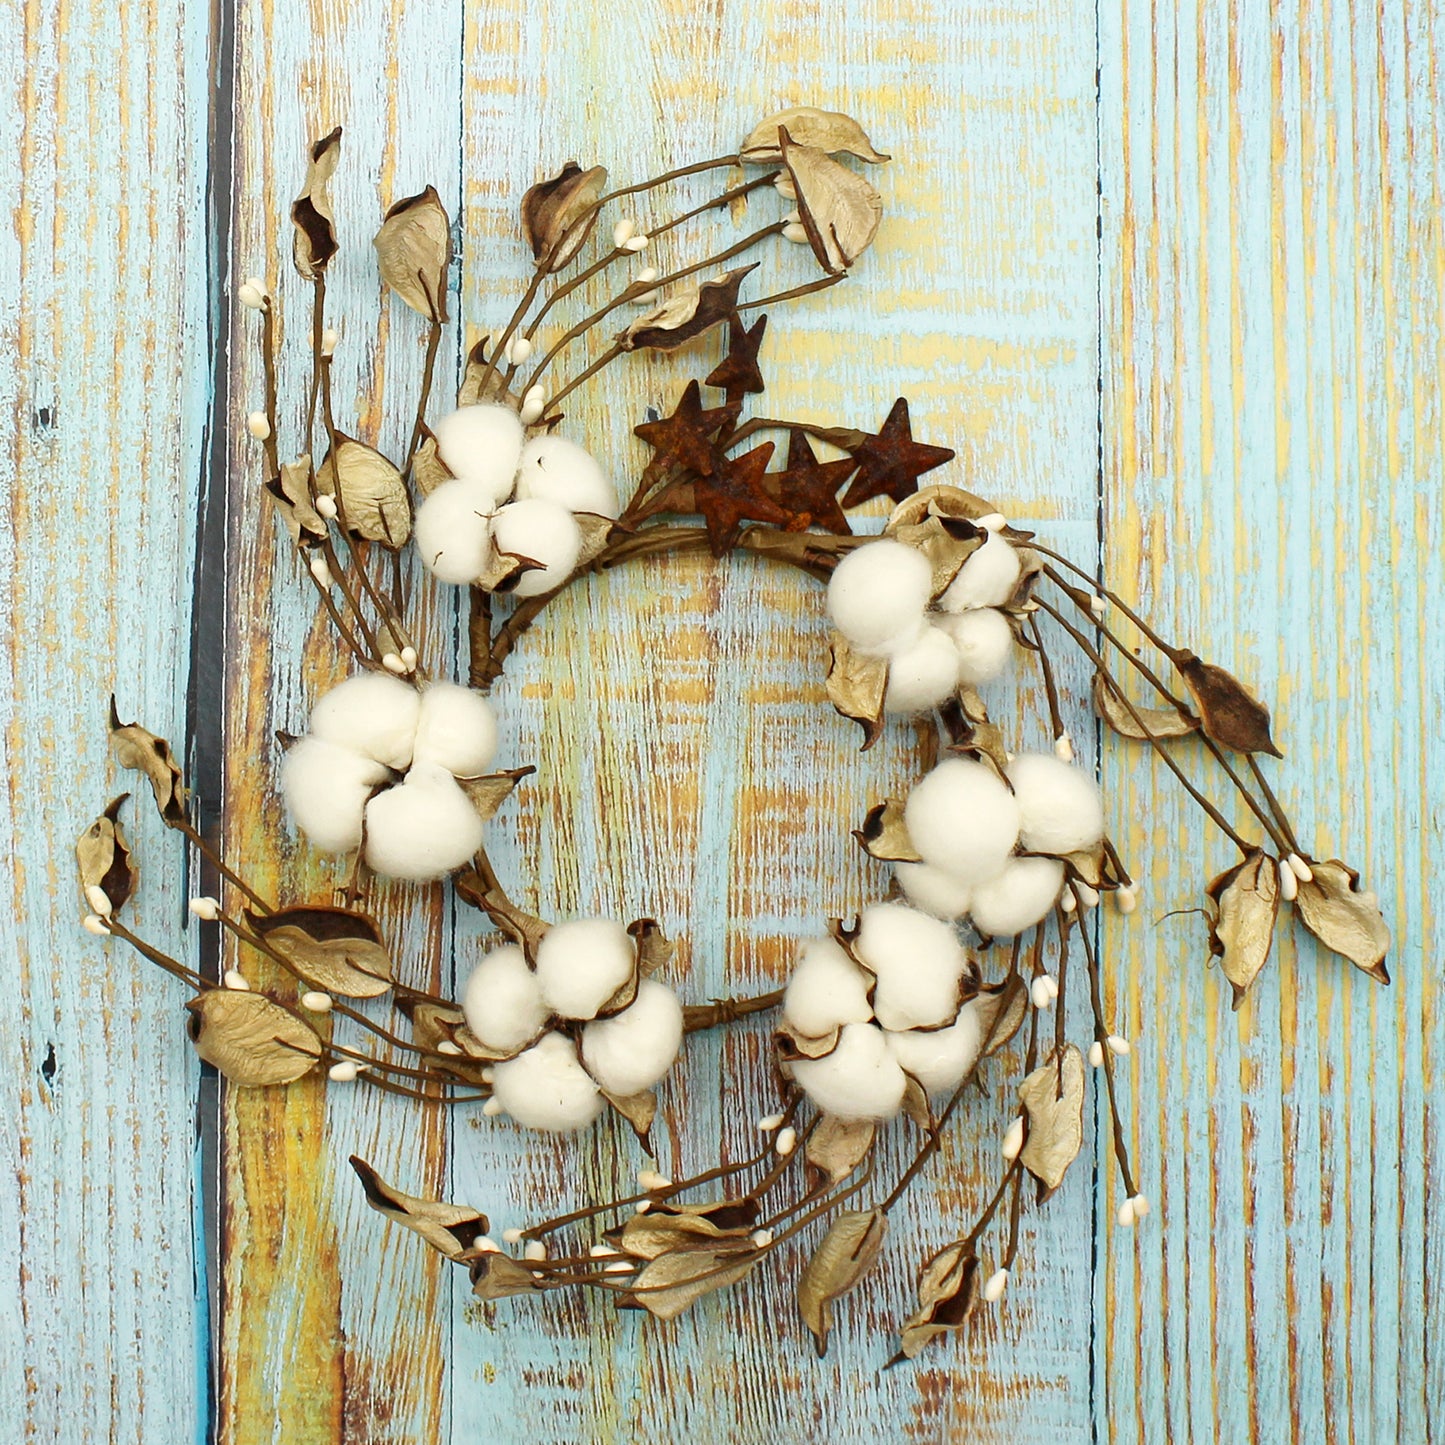 CVHOMEDECO. Primitives Rustic Cotton Pod Pip Berries and Autumn Leaves with Rusty Barn Stars Wreath, 12 Inch